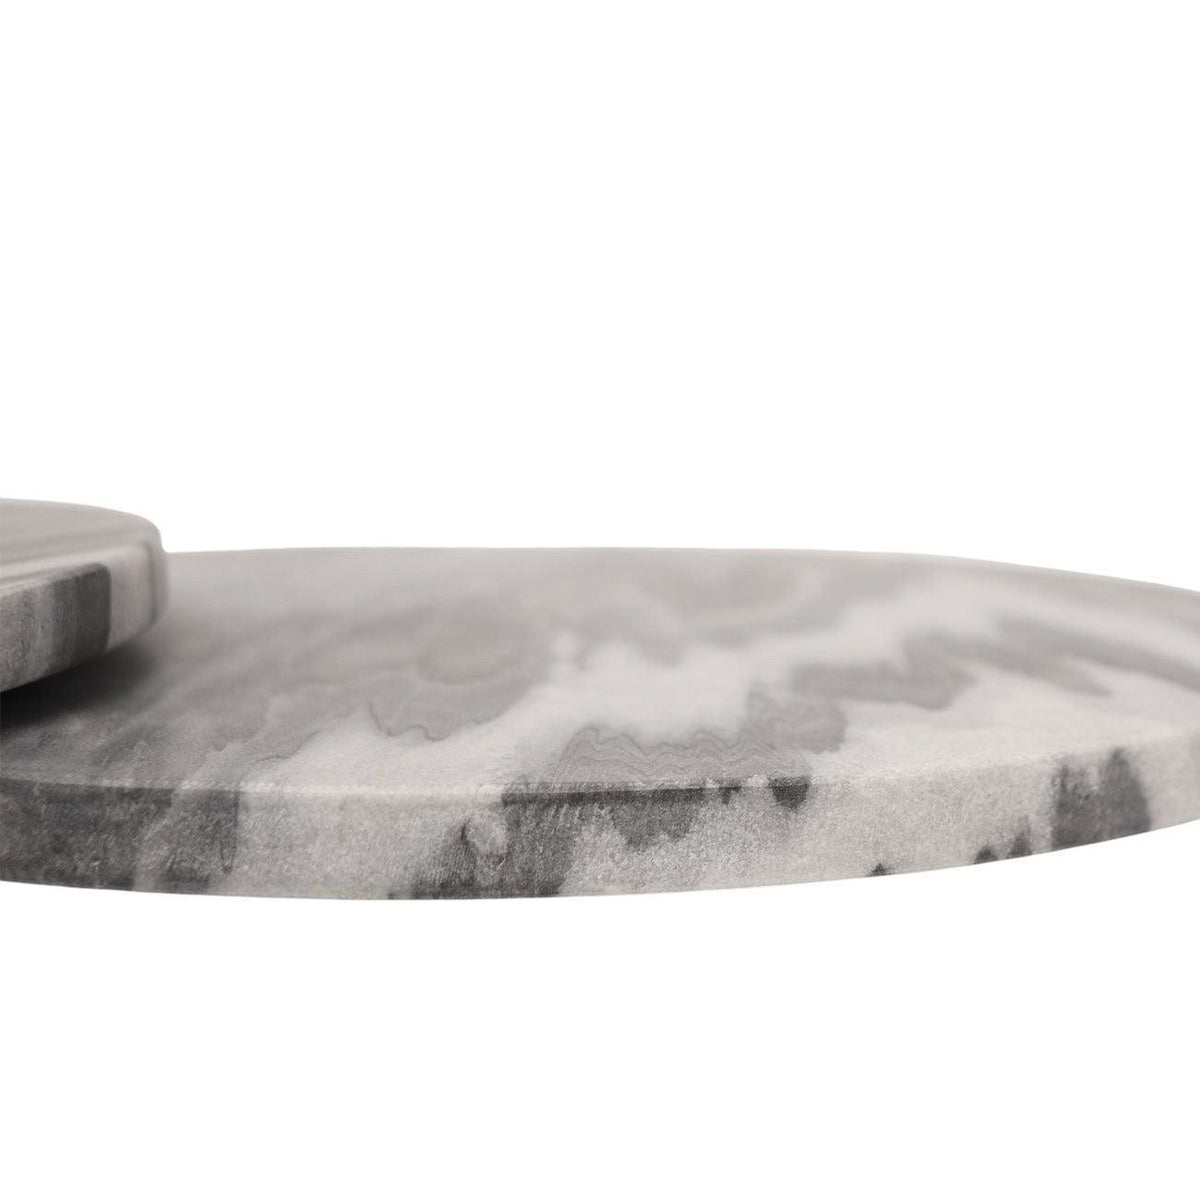 Marble Charger Plate - Grey - Humble & Grand Homestore